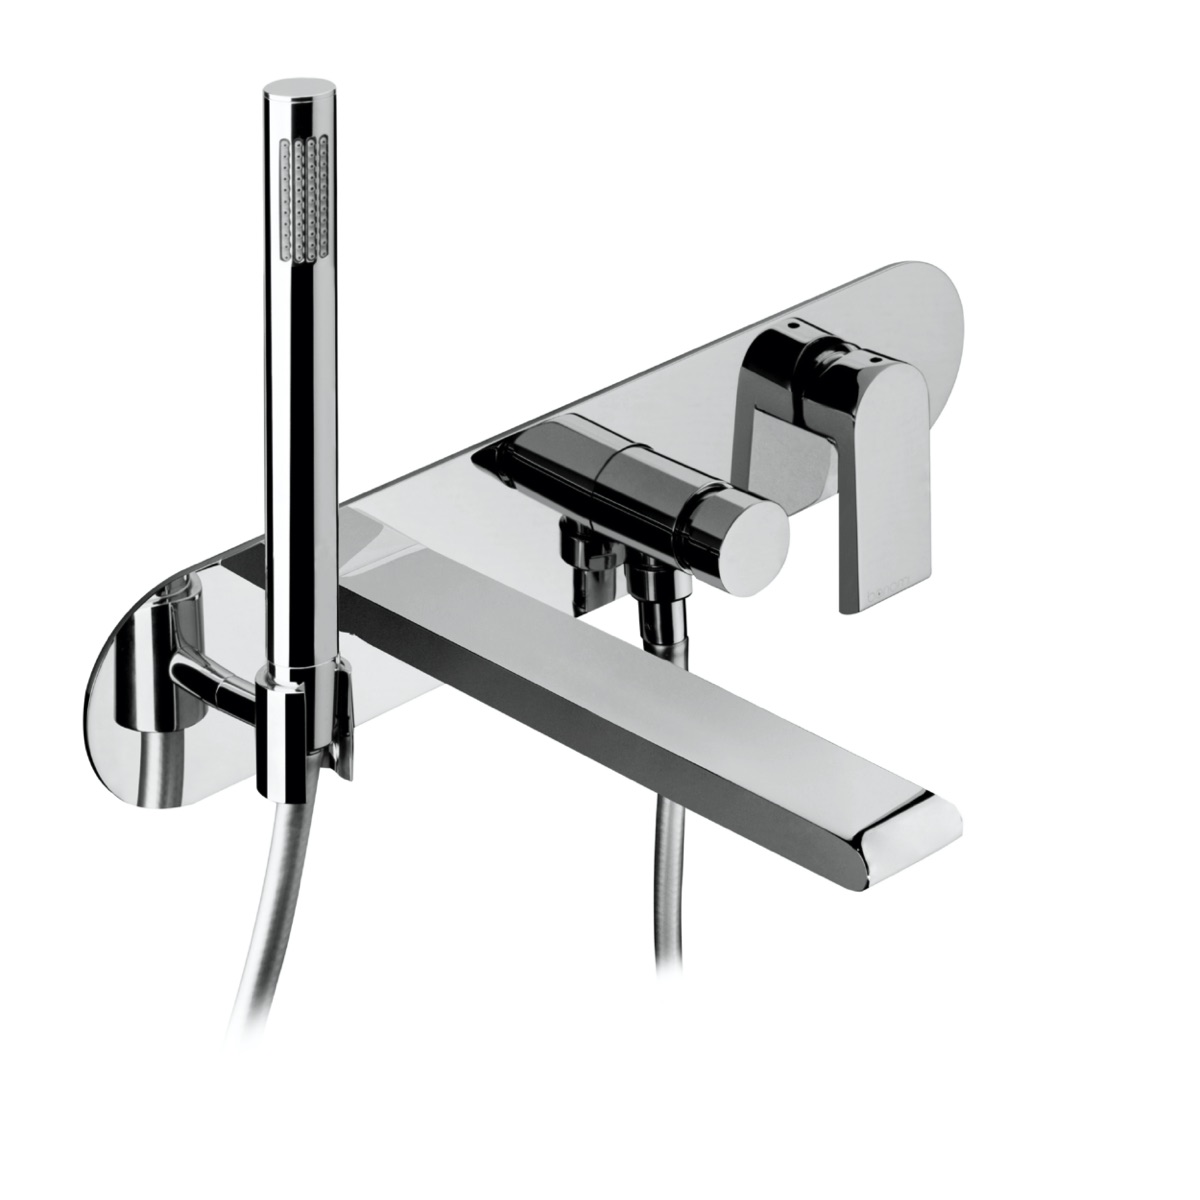 Wall mounted bath/shower mixer with plate, diverter and hand shower